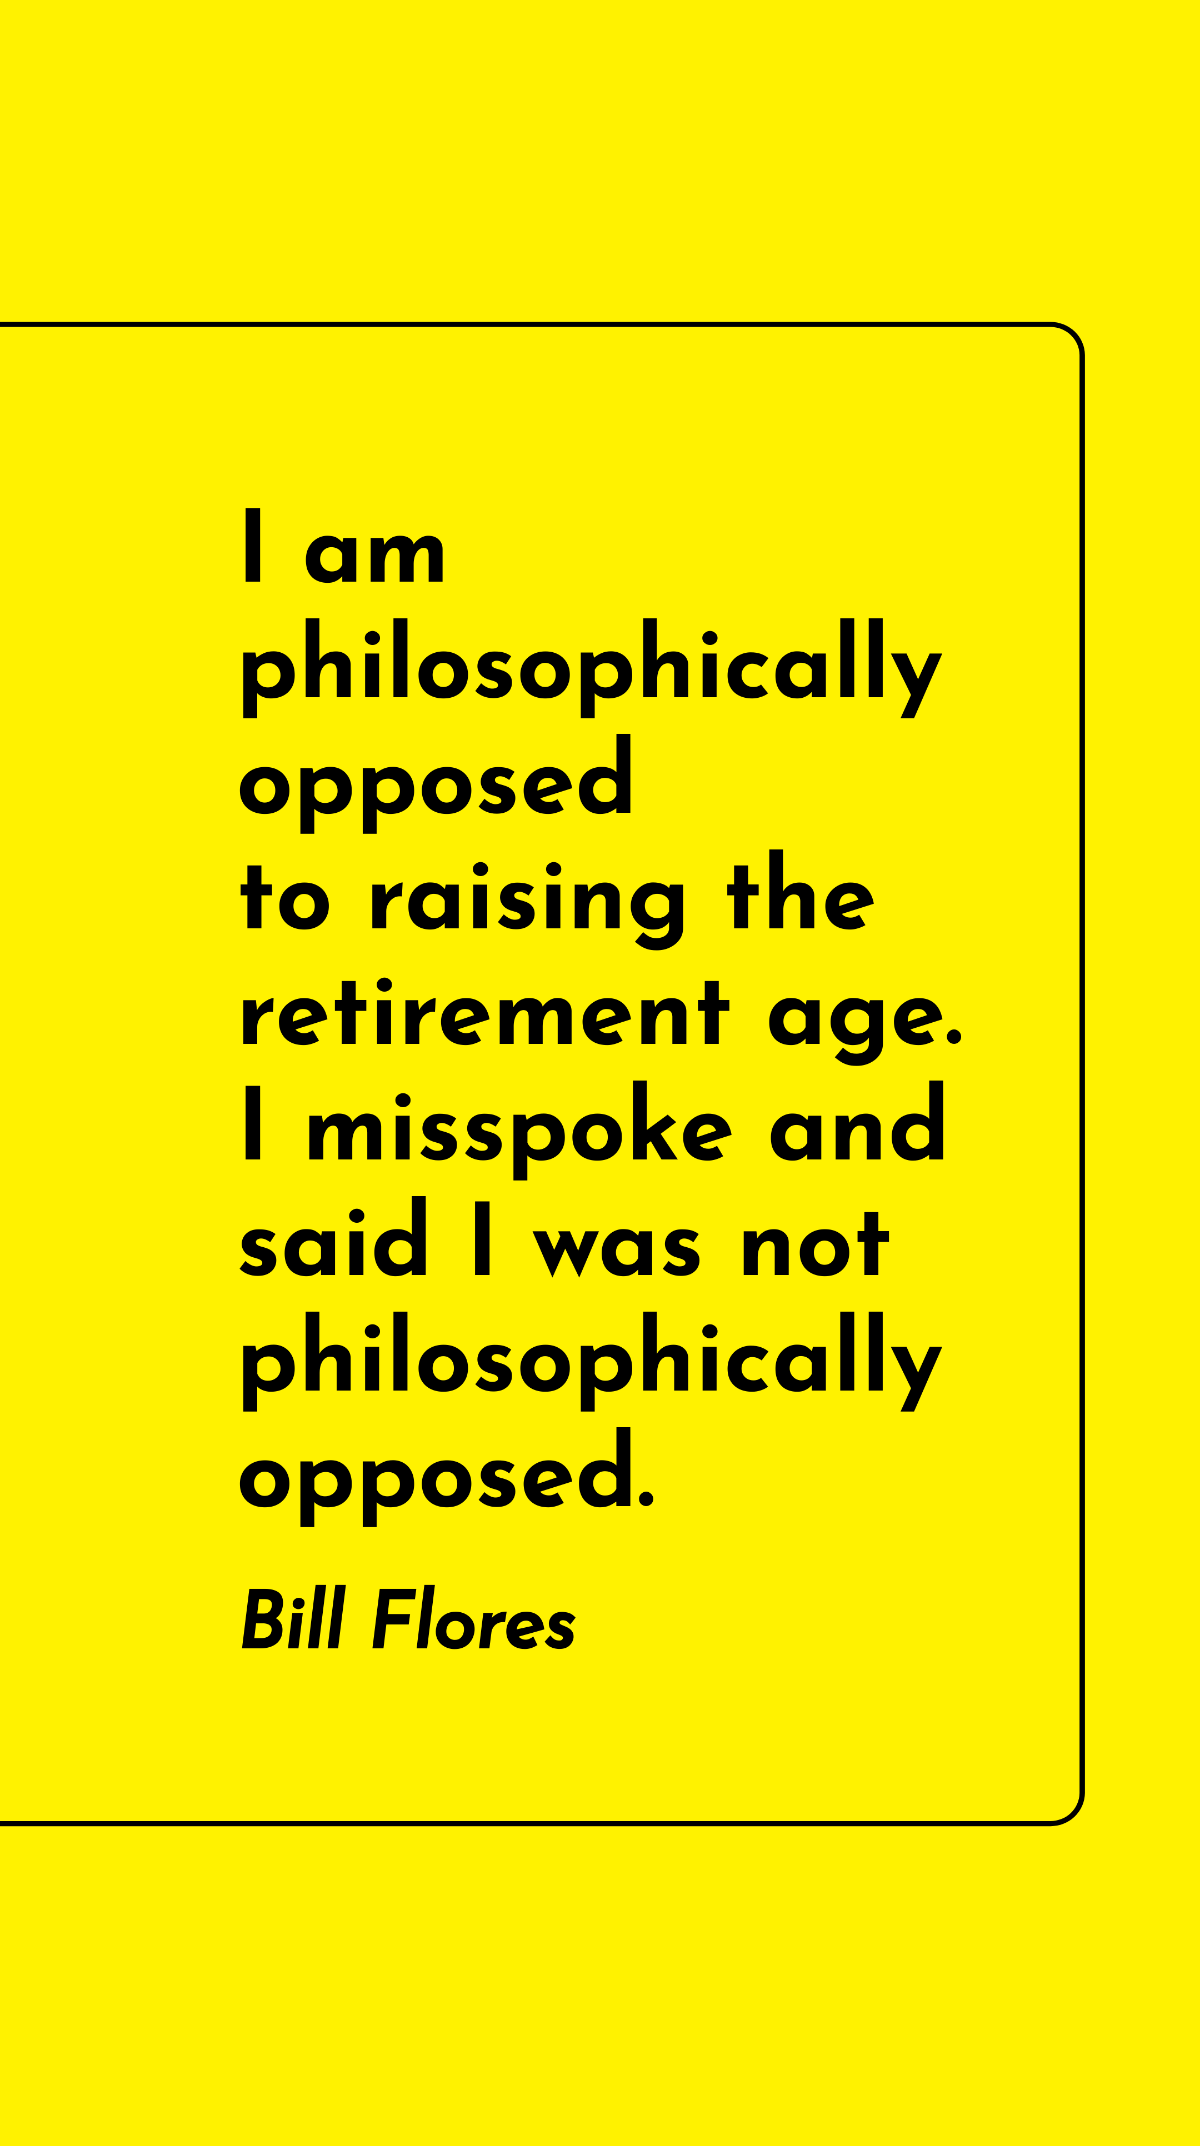 Bill Flores - I am philosophically opposed to raising the retirement age. I misspoke and said I was not philosophically opposed.